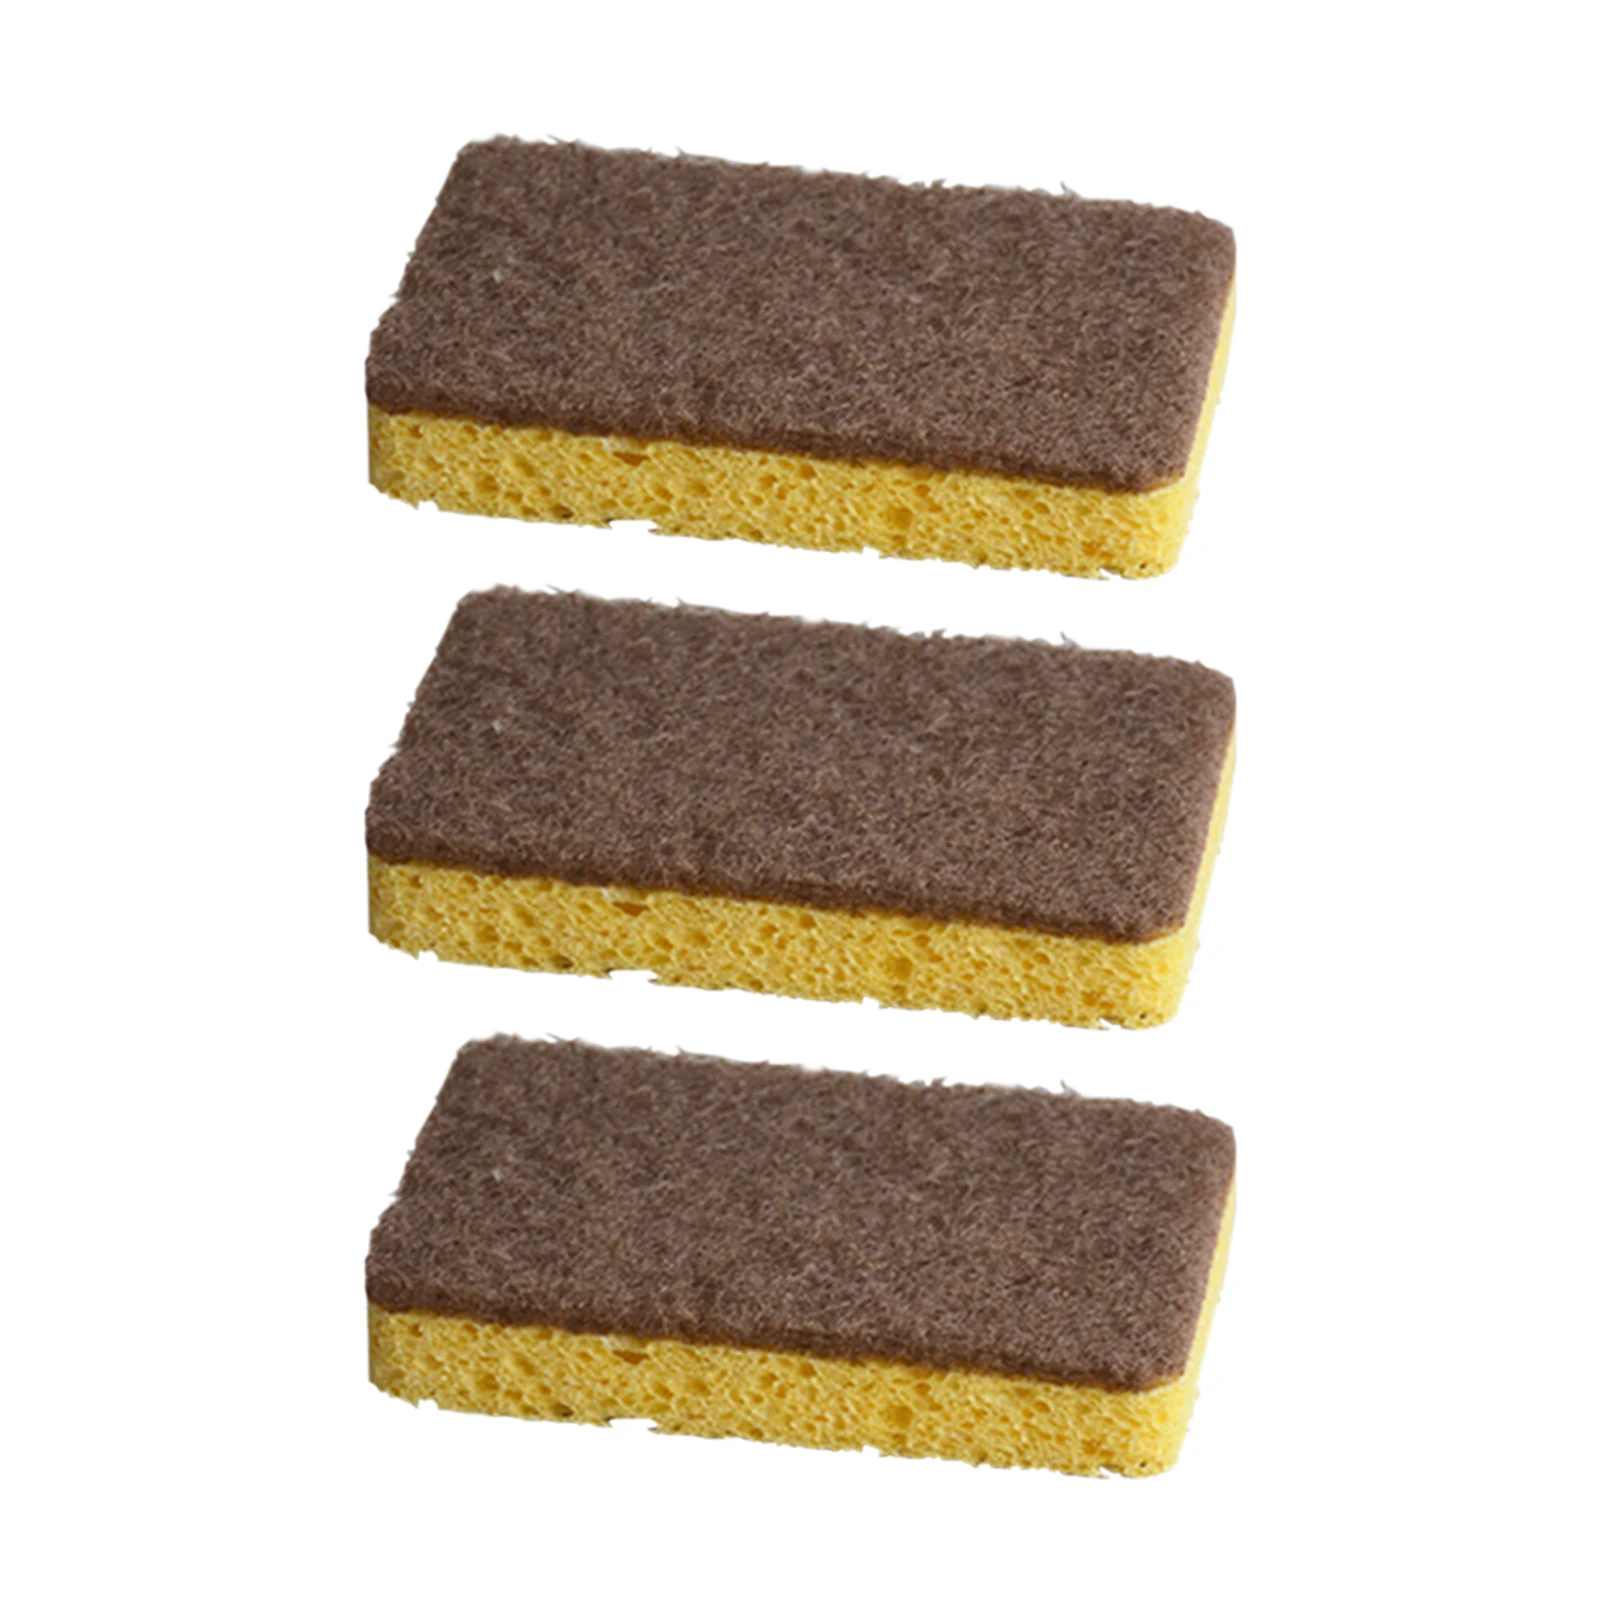 

Non-scratch Home Dish Washing Sponge Durable Portable Scouring Pad No Smell Bathroom For Kitchen Reusable Water Absorption Soft